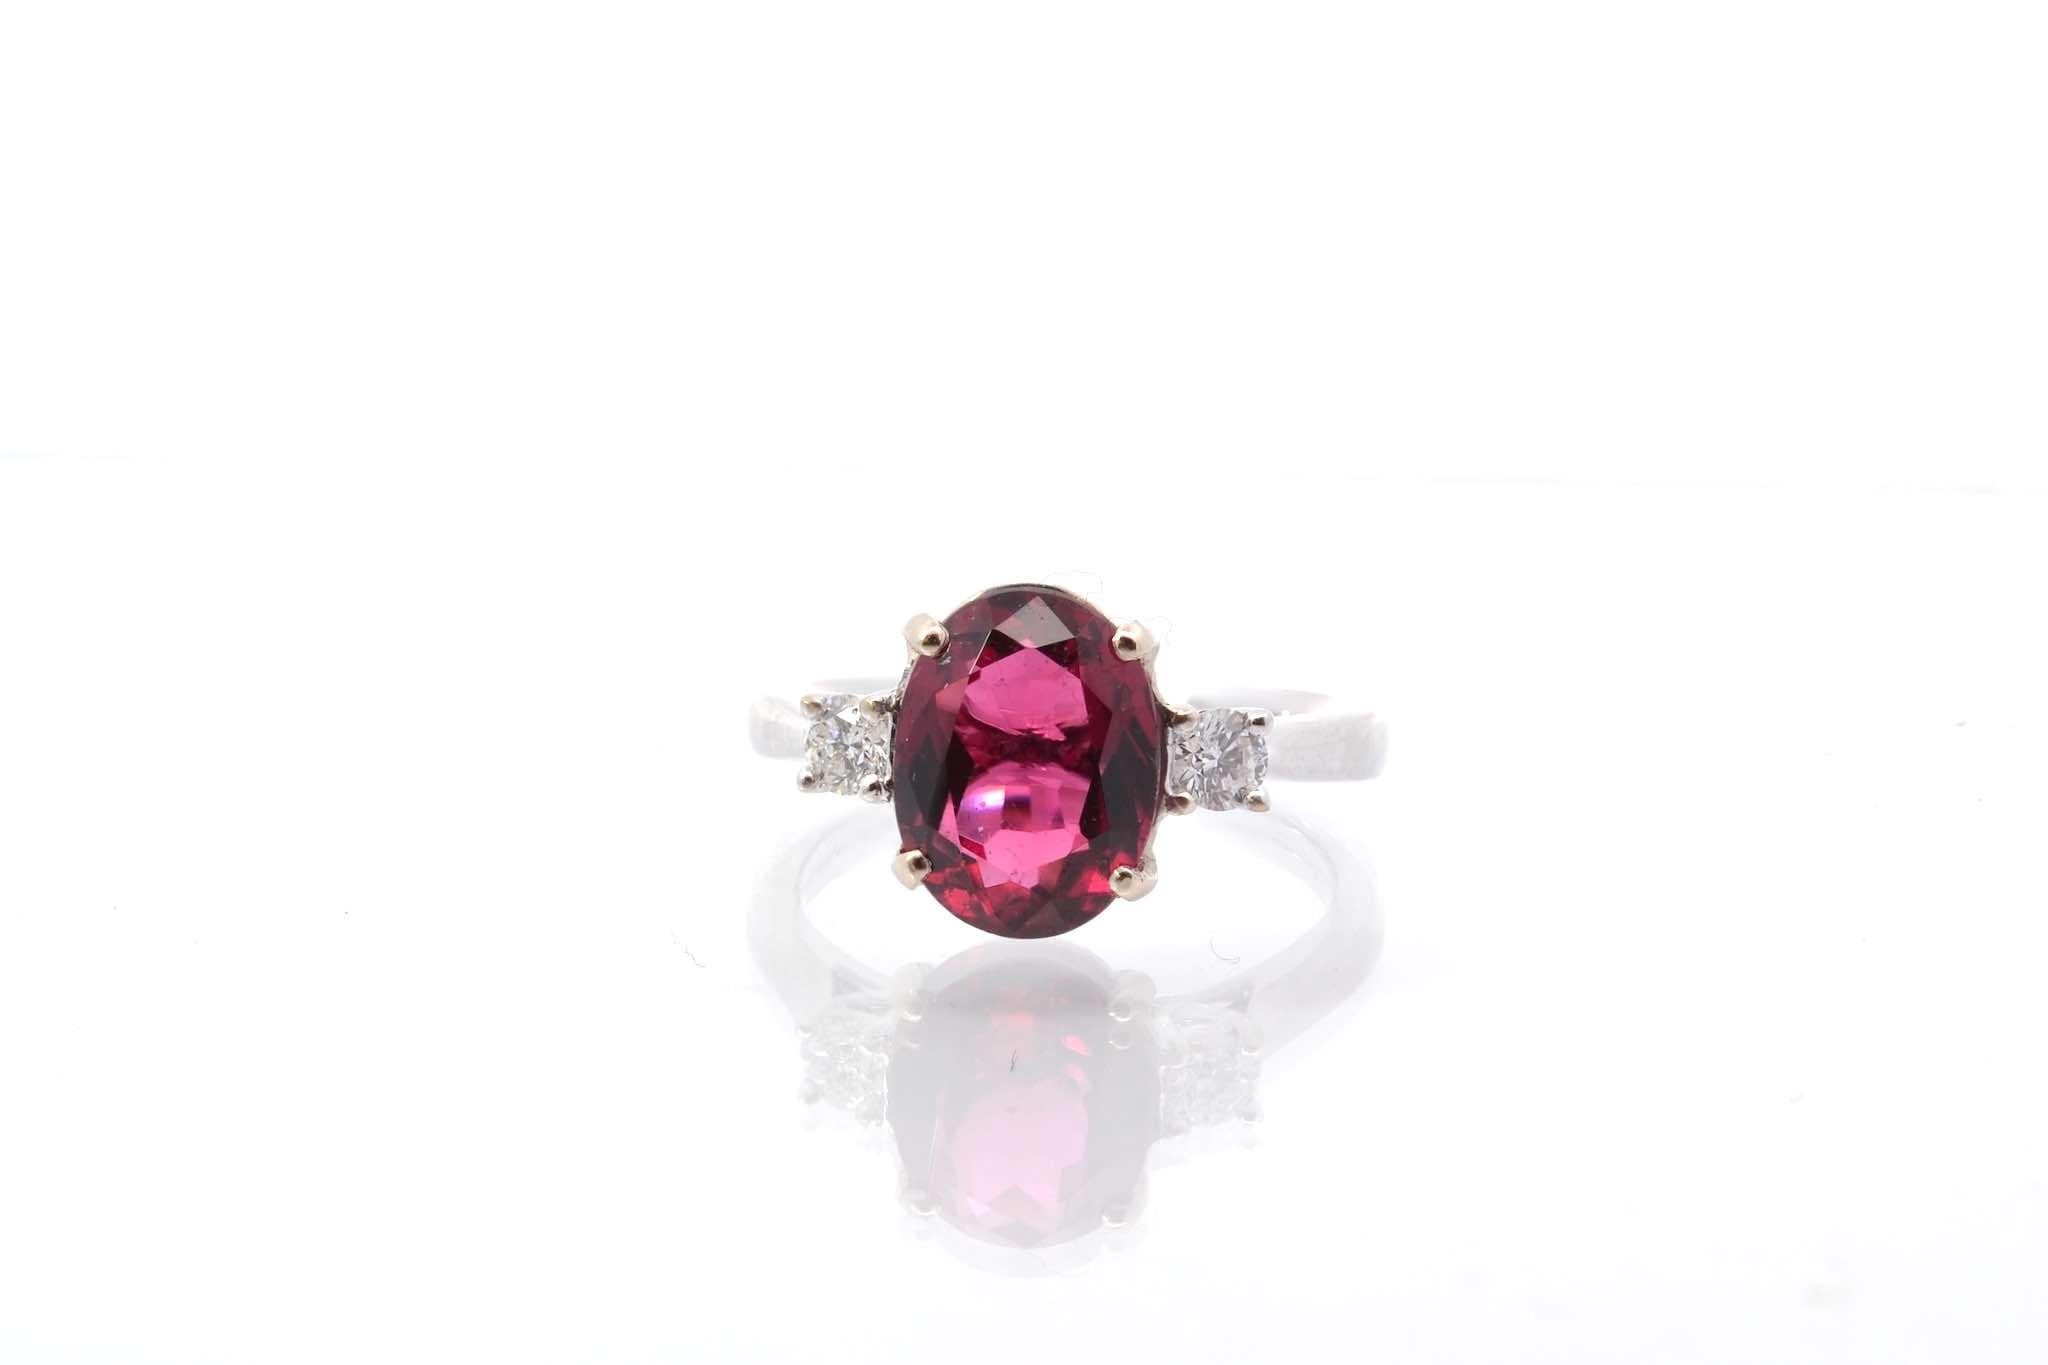 Stones: Rubellite 3.05 cts and diamonds: 0.25 ct.
Material: 18k white gold
Weight: 4.8g
Period: Recent
Size: 53 (free sizing)
Certificate
Ref. : 23874